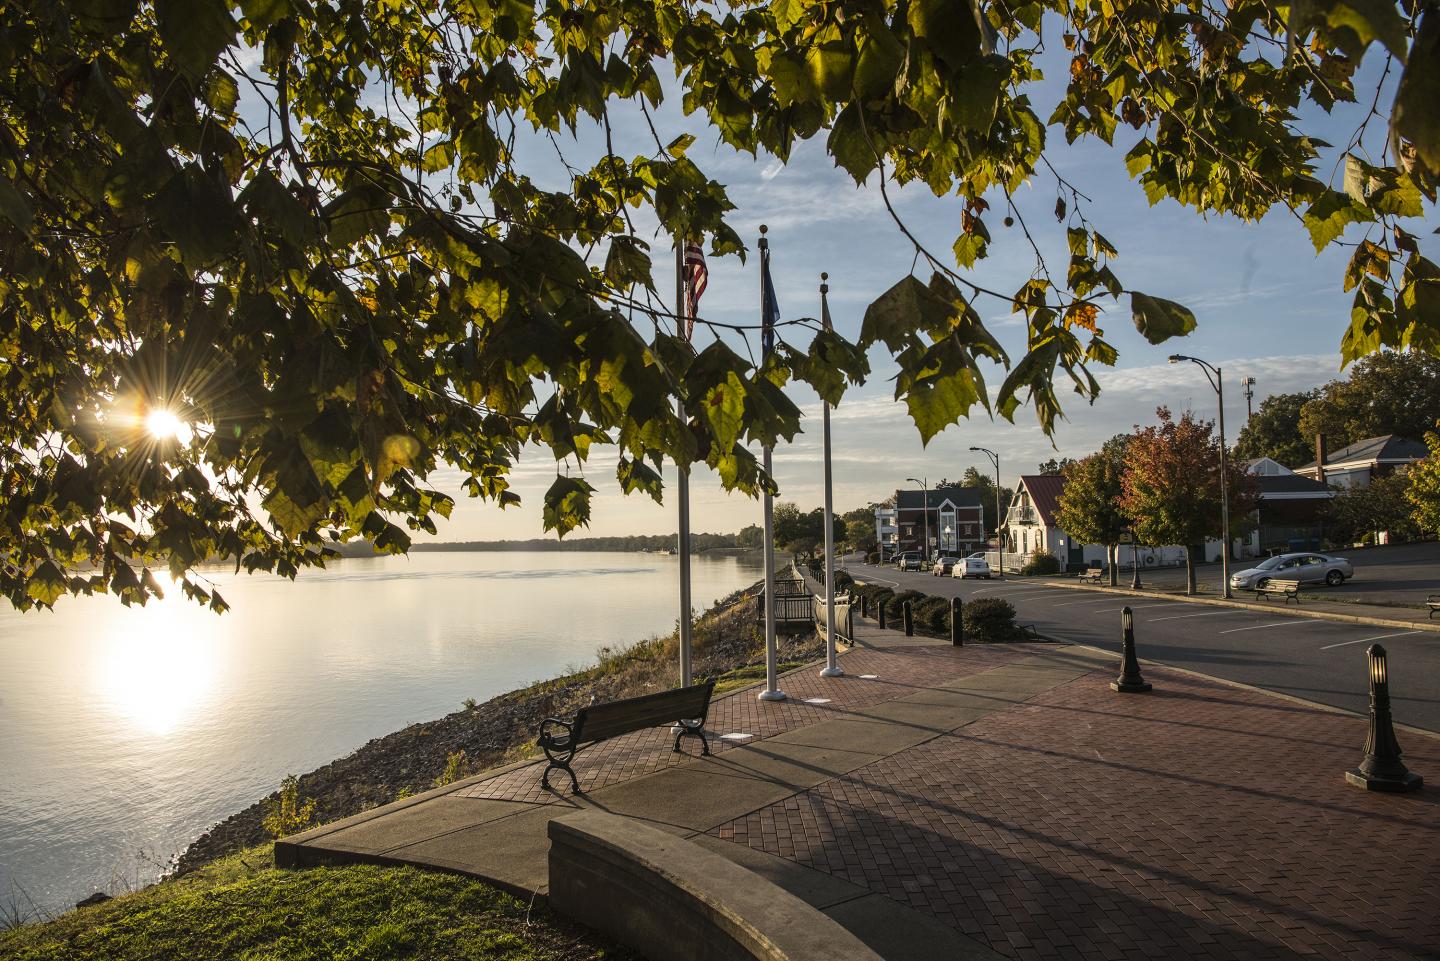 The Rivertown Trail hugging the Ohio River through historic Newburgh, Indiana. Photography by Alex Morgan Imaging.